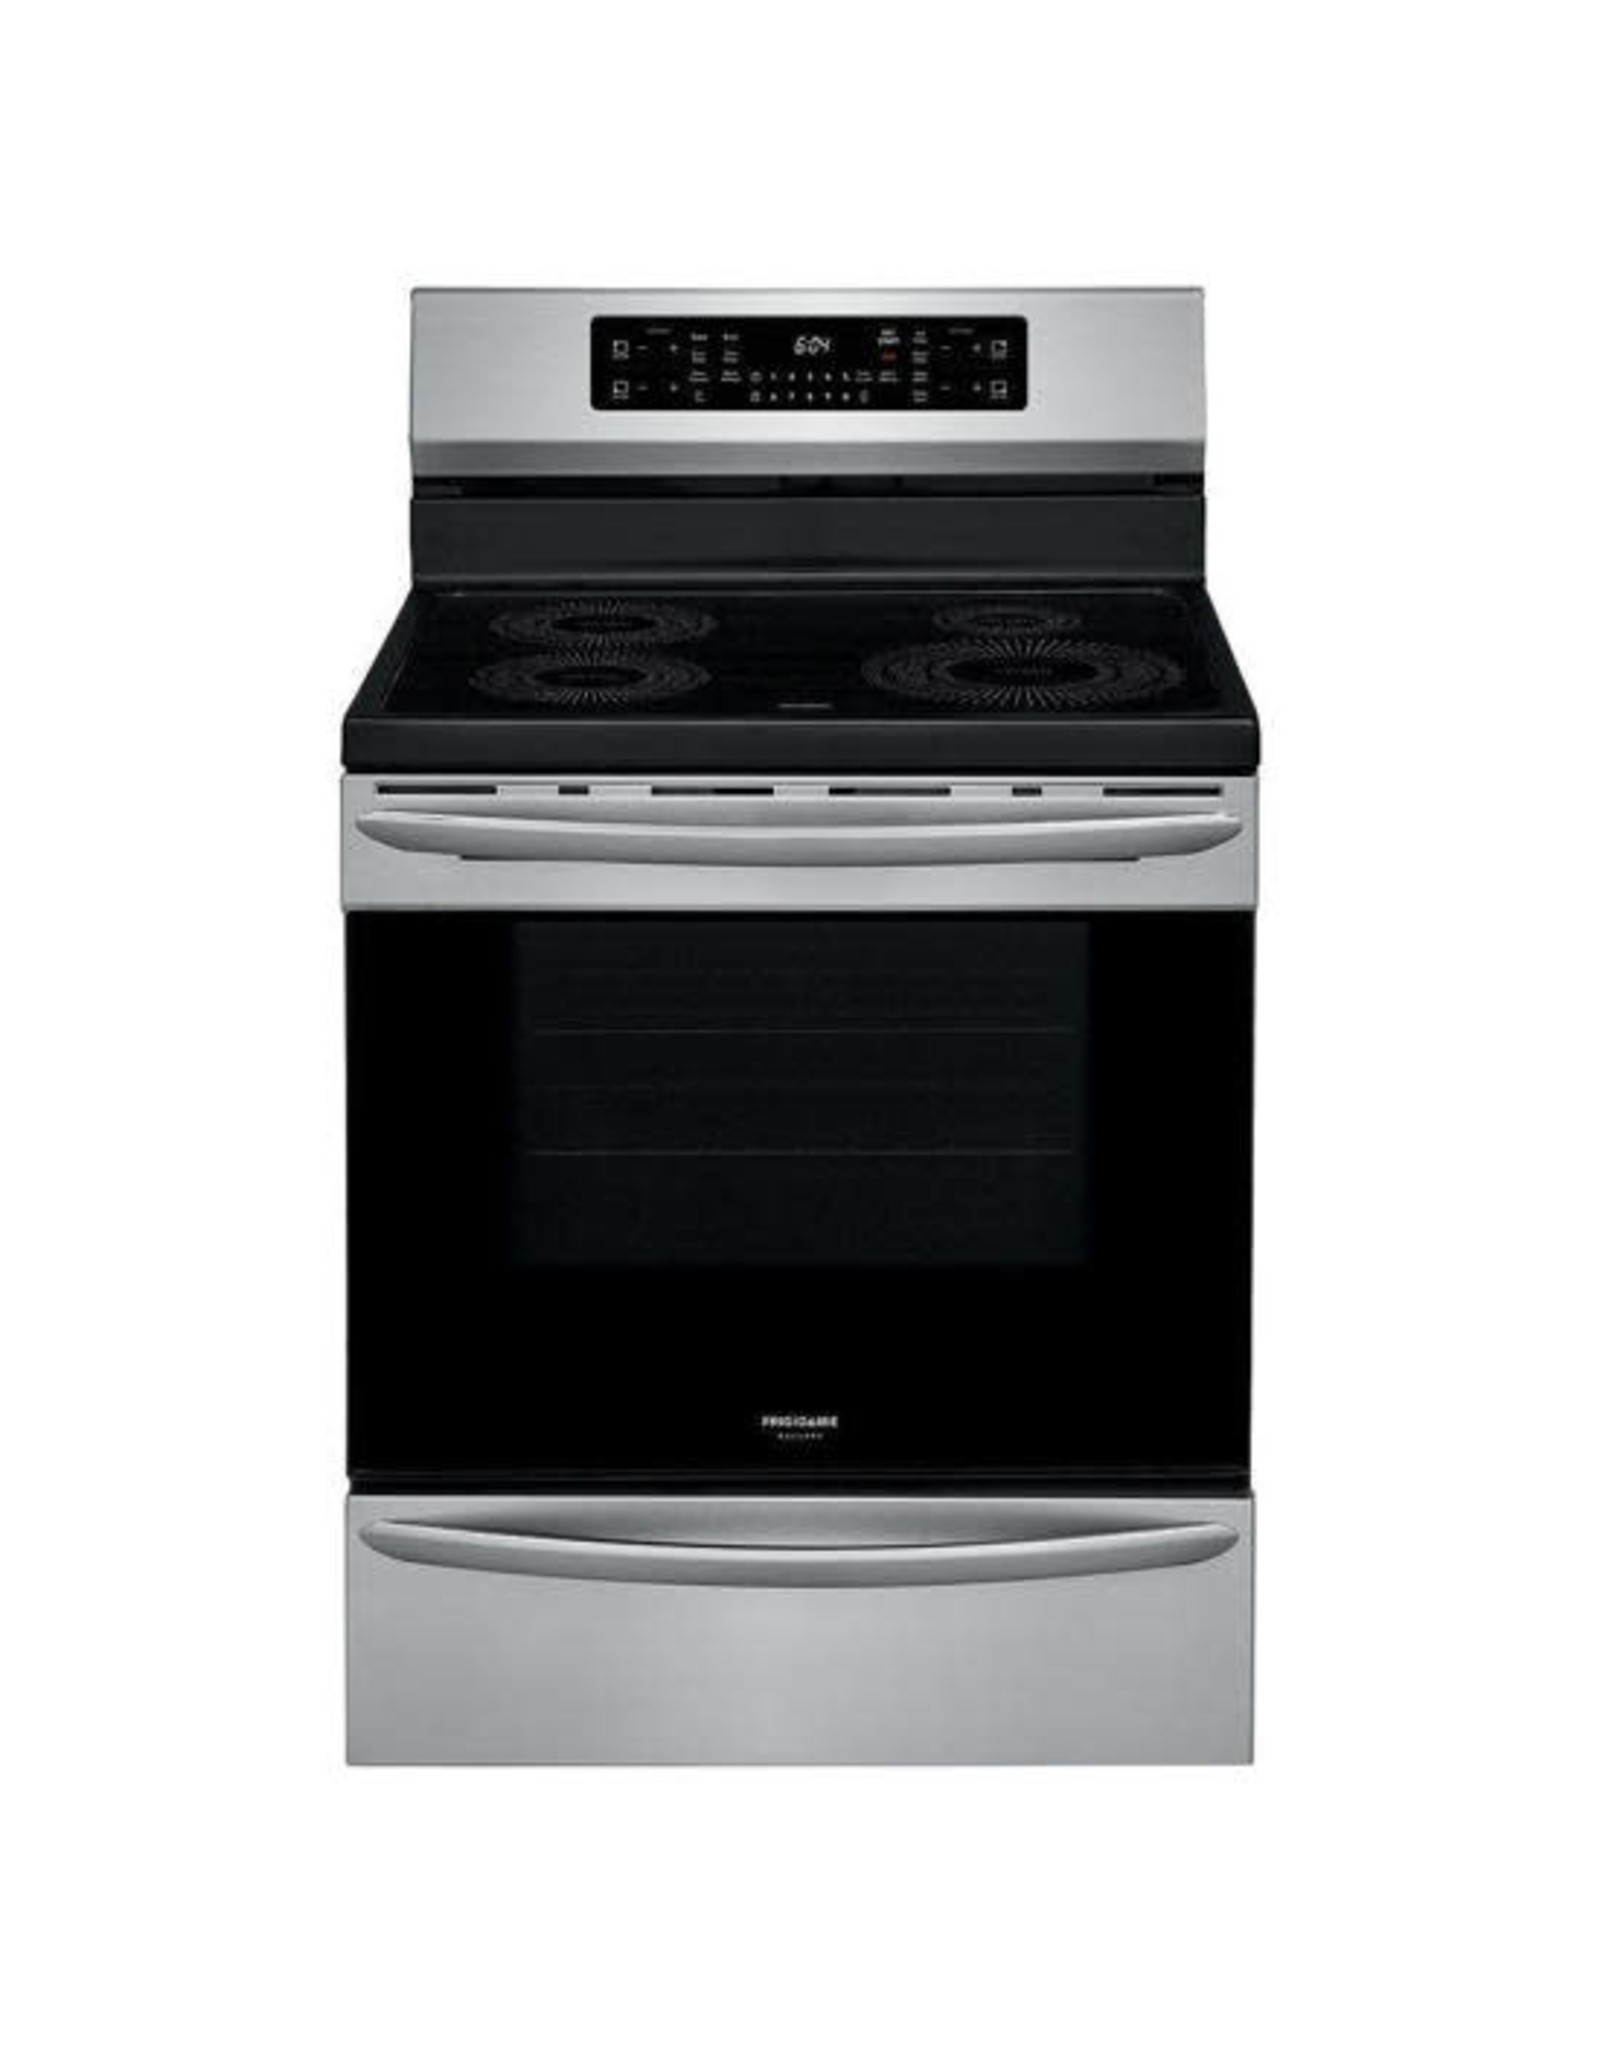 FRIGIDAIRE GCRI3058AF 30 in. 5.4 cu. ft. Induction Electric Range with Self-Cleaning Oven in Smudge-Proof Stainless Steel with Air Fry